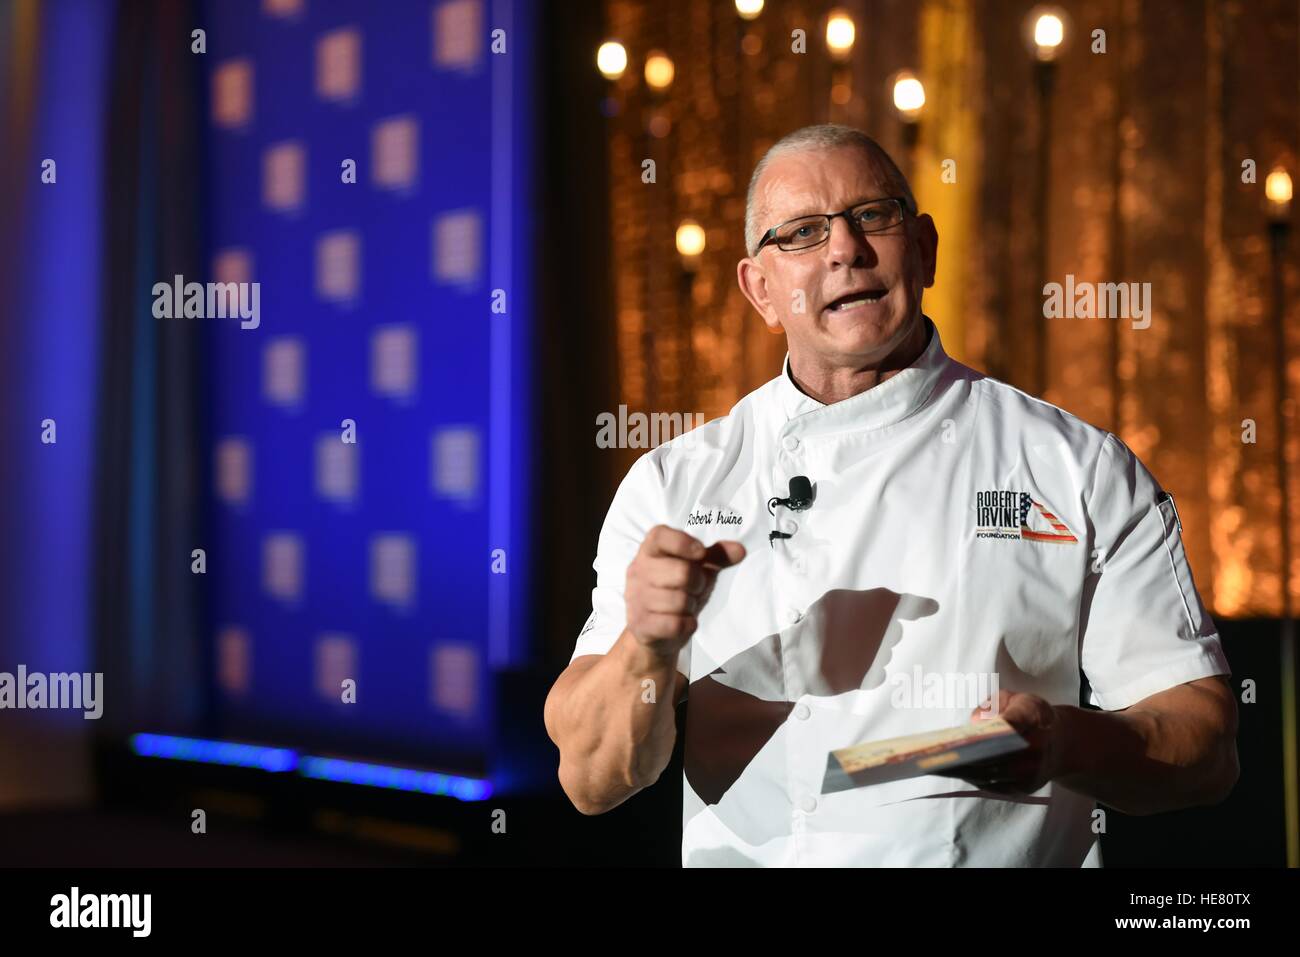 Chef Robert Irvine speaks at the USO Gala at the Daughters of the American Revolution Constitution Hall October 20, 2016 in Washington, DC. Stock Photo